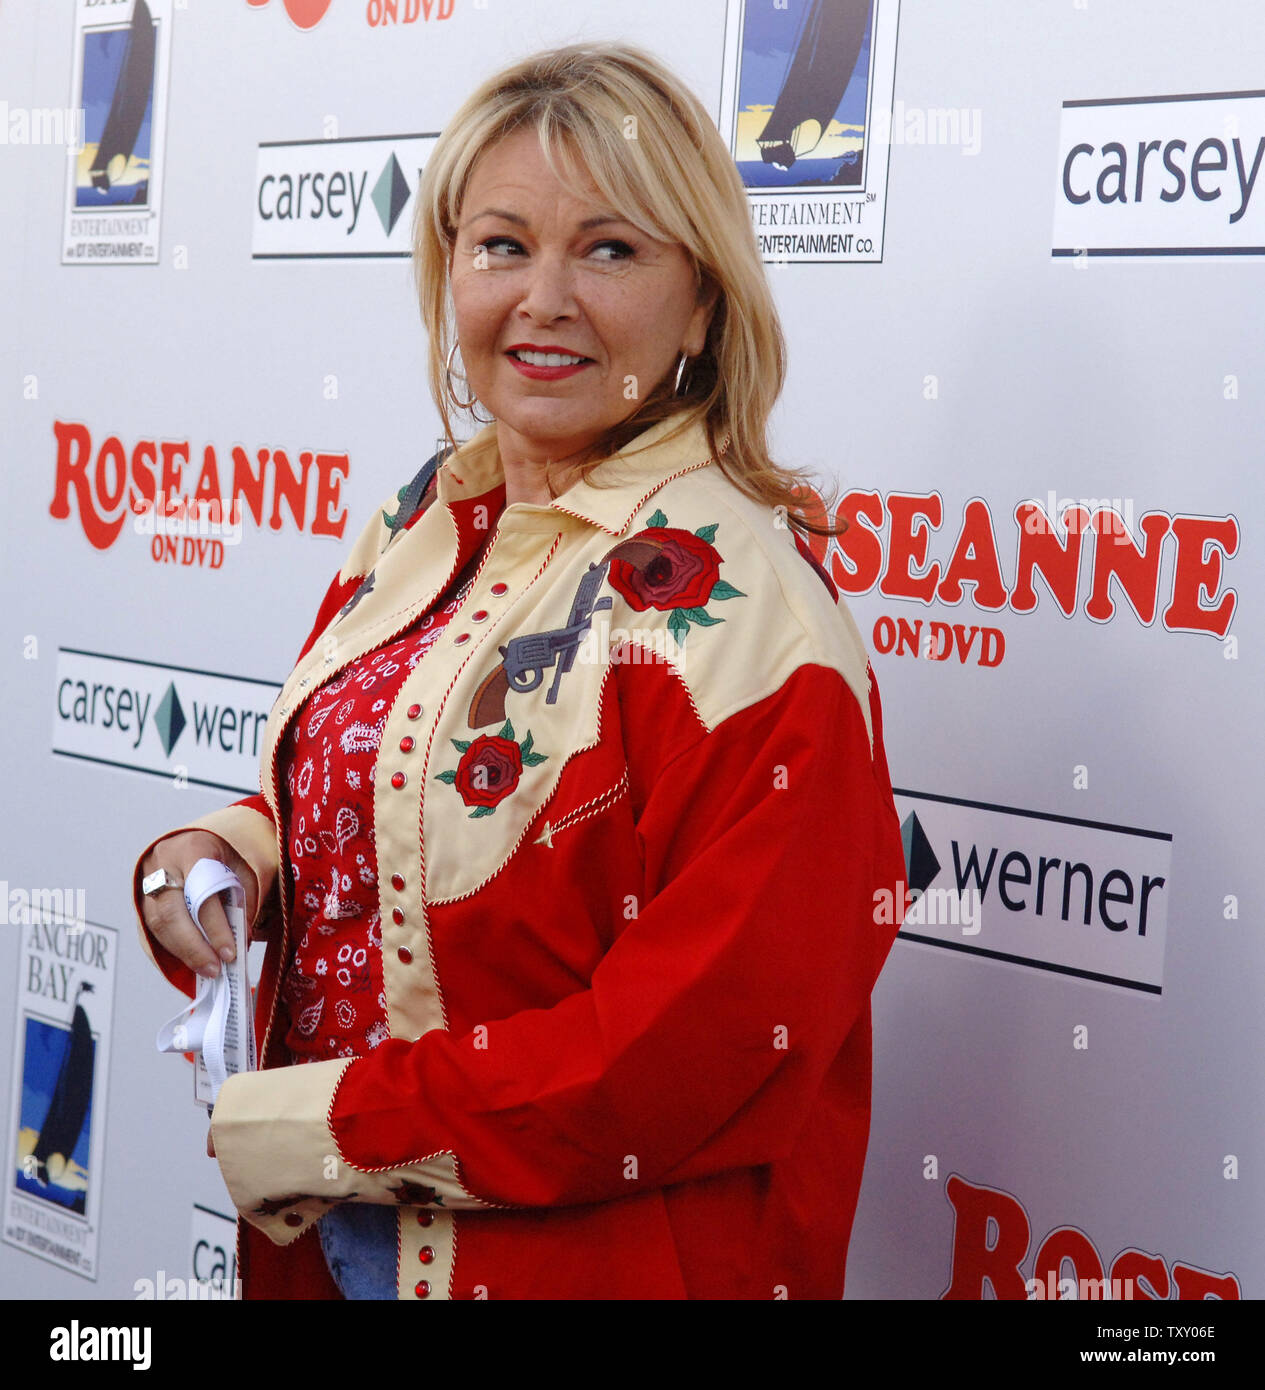 Roseanne, who stars in the television comedy series 